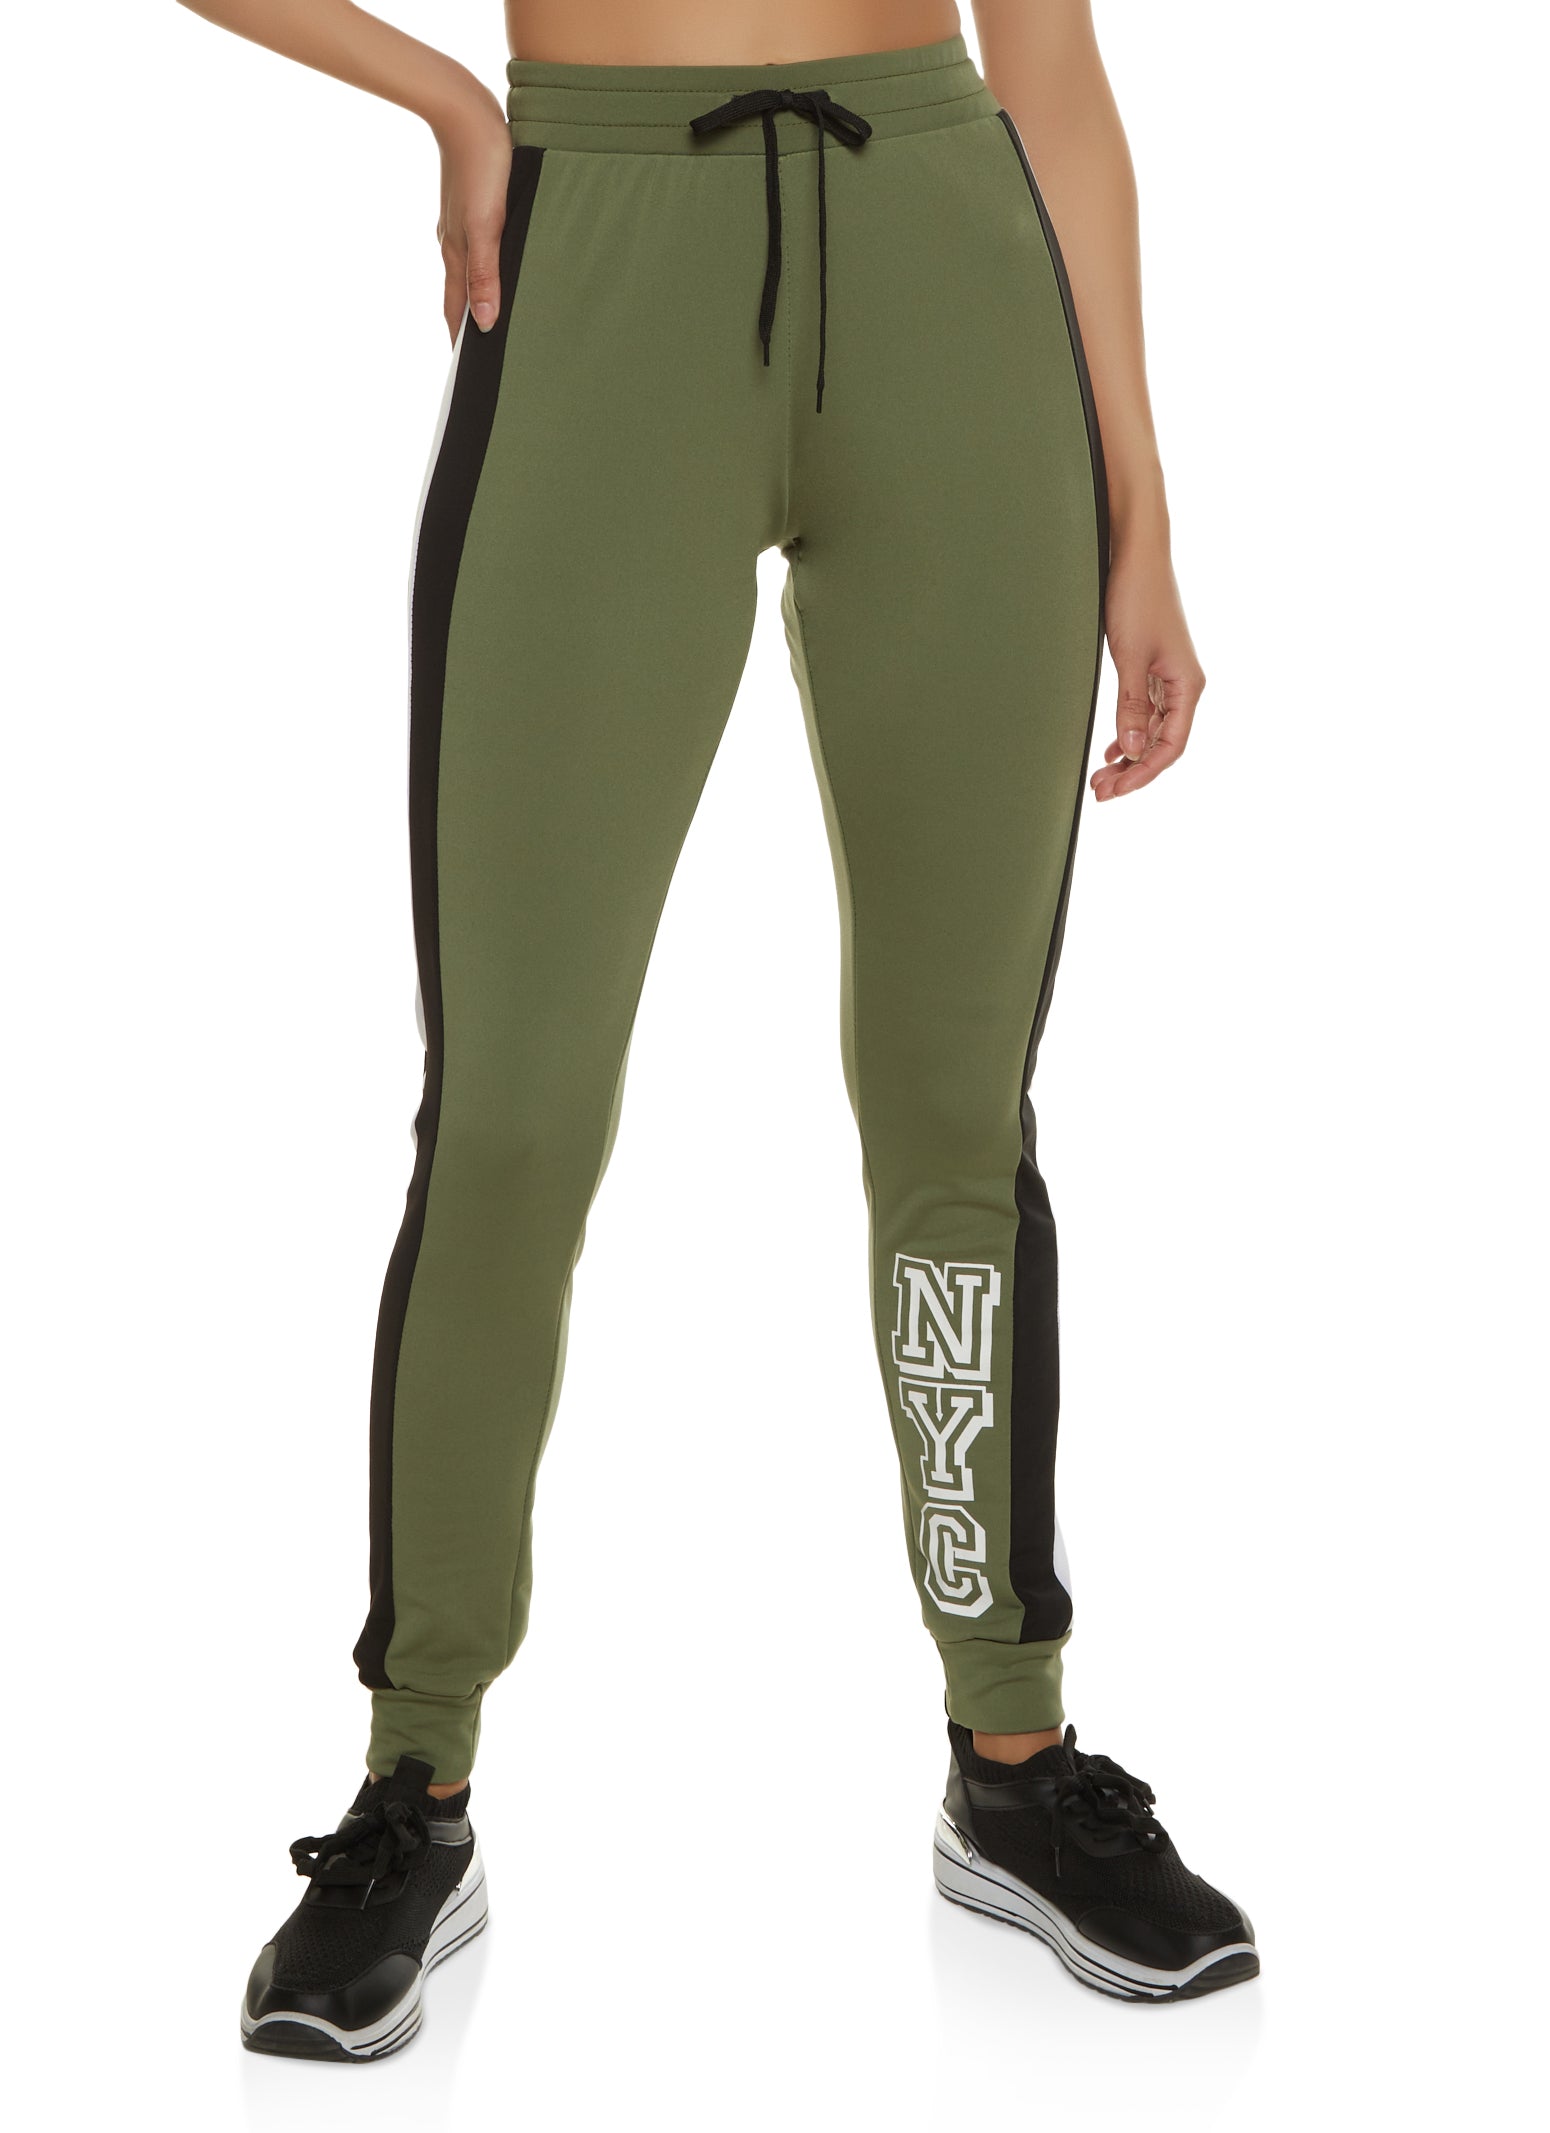 Womens NYC Side Stripe Drawstring Joggers, Green, Size S